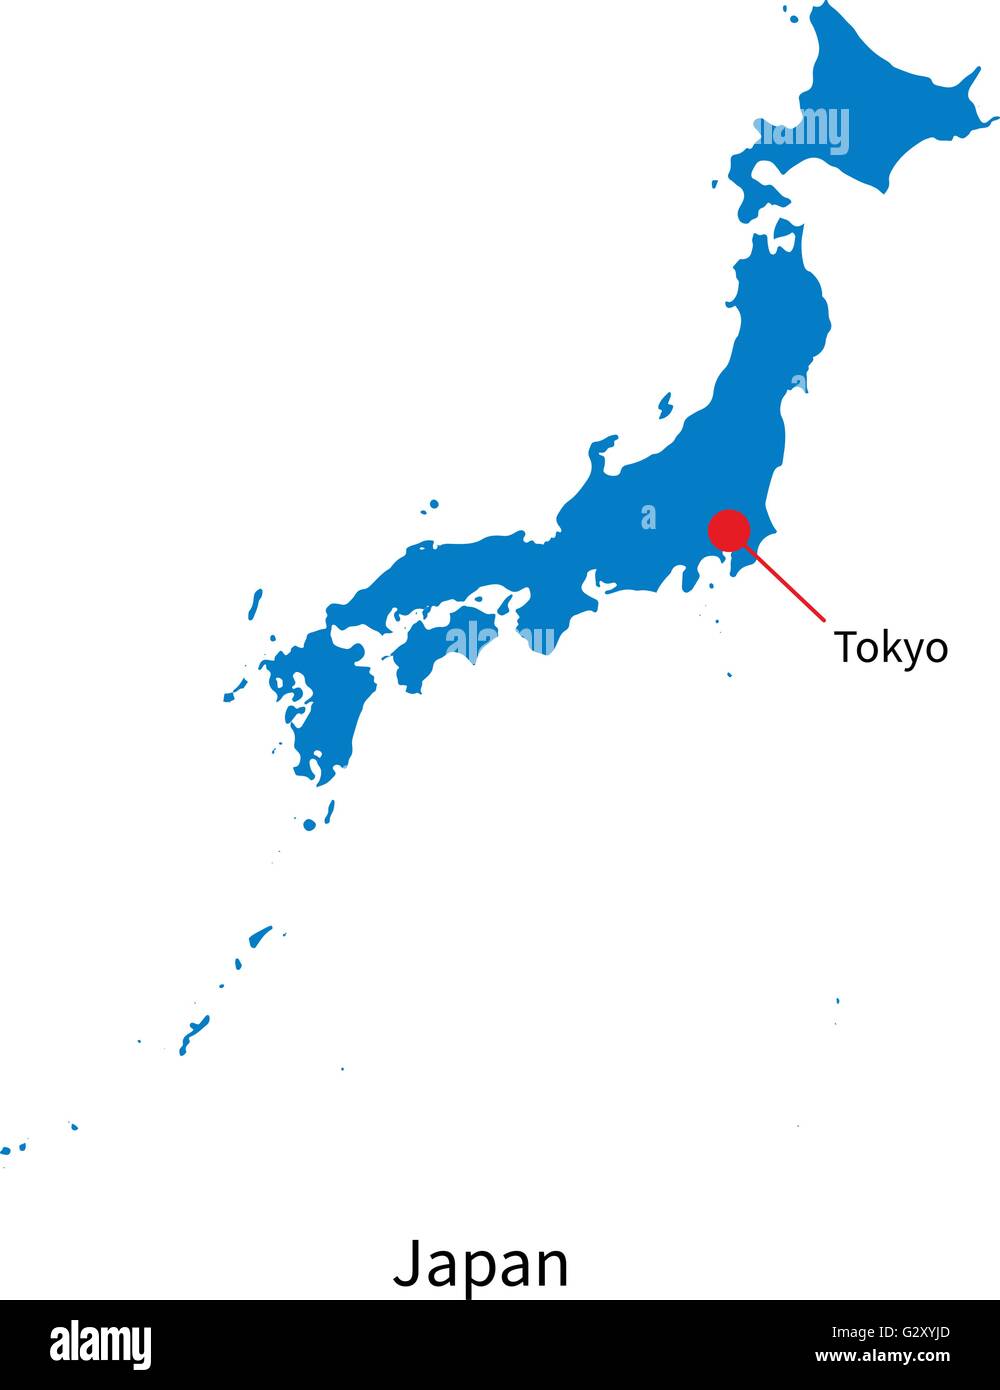 Detailed vector map of Japan and capital city Tokyo Stock Vector